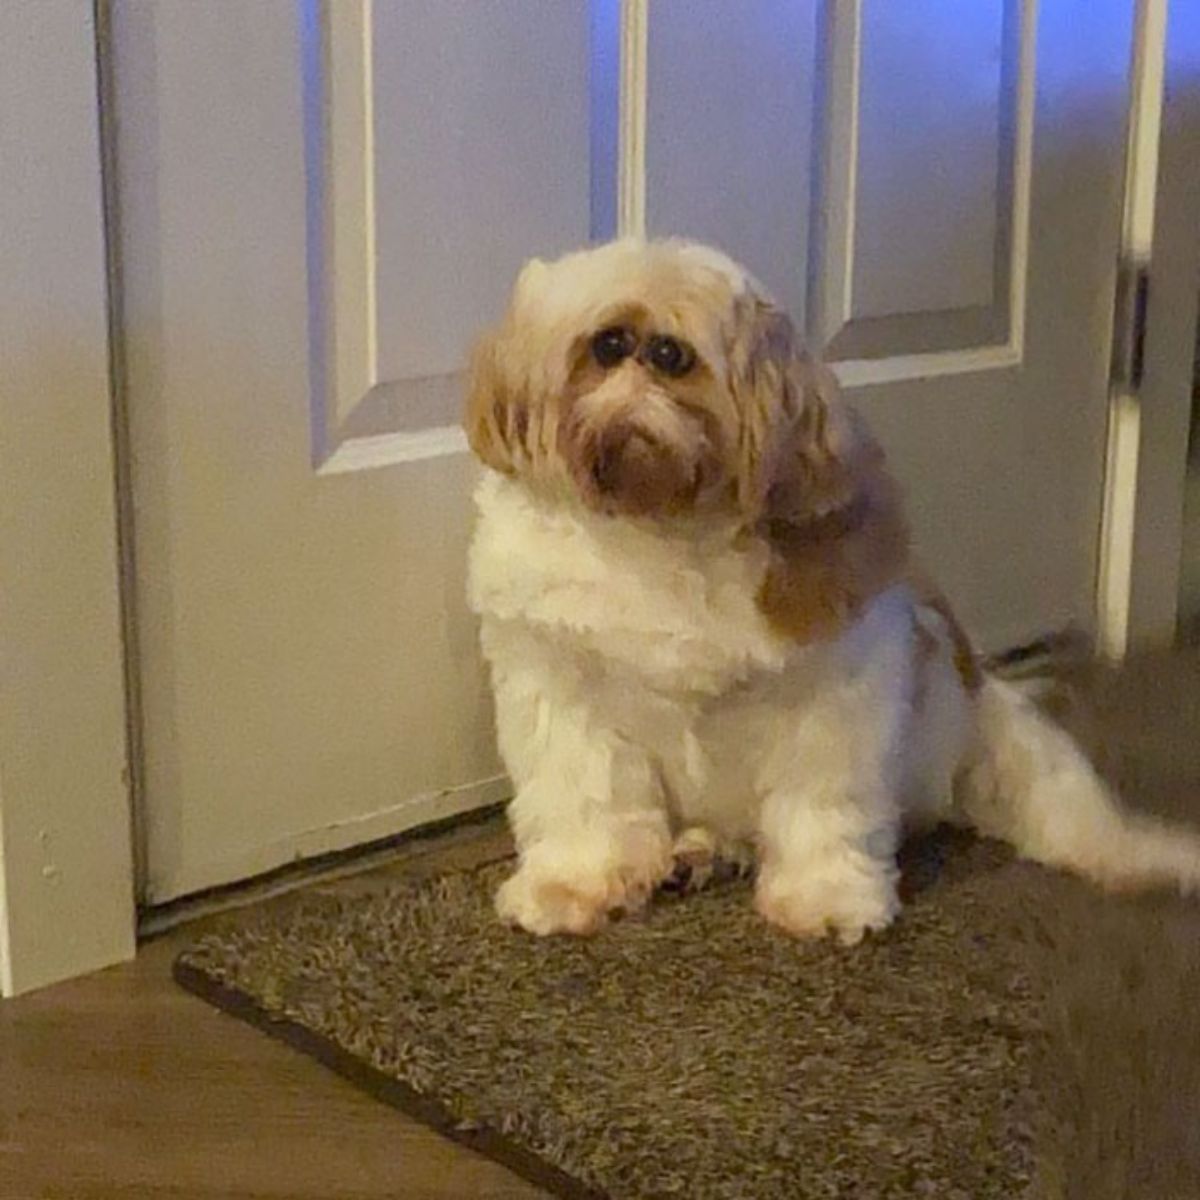 panoramic fail of fluffy brown and white dog sitting against a door with a small face and very large round eyes set very close together